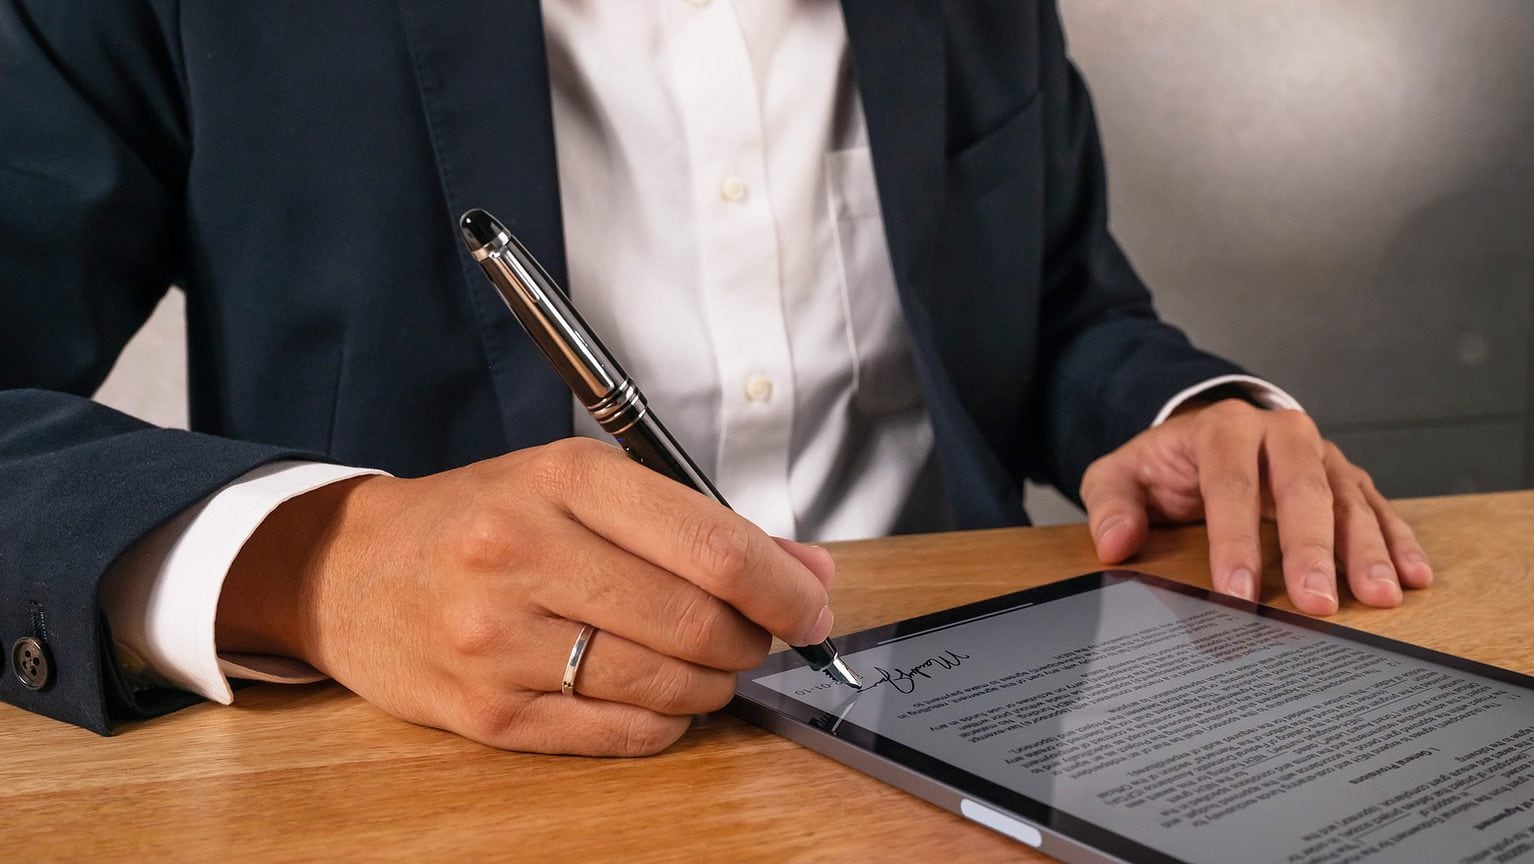 Go old school with iPad stylus that mimics the look of a fountain pen